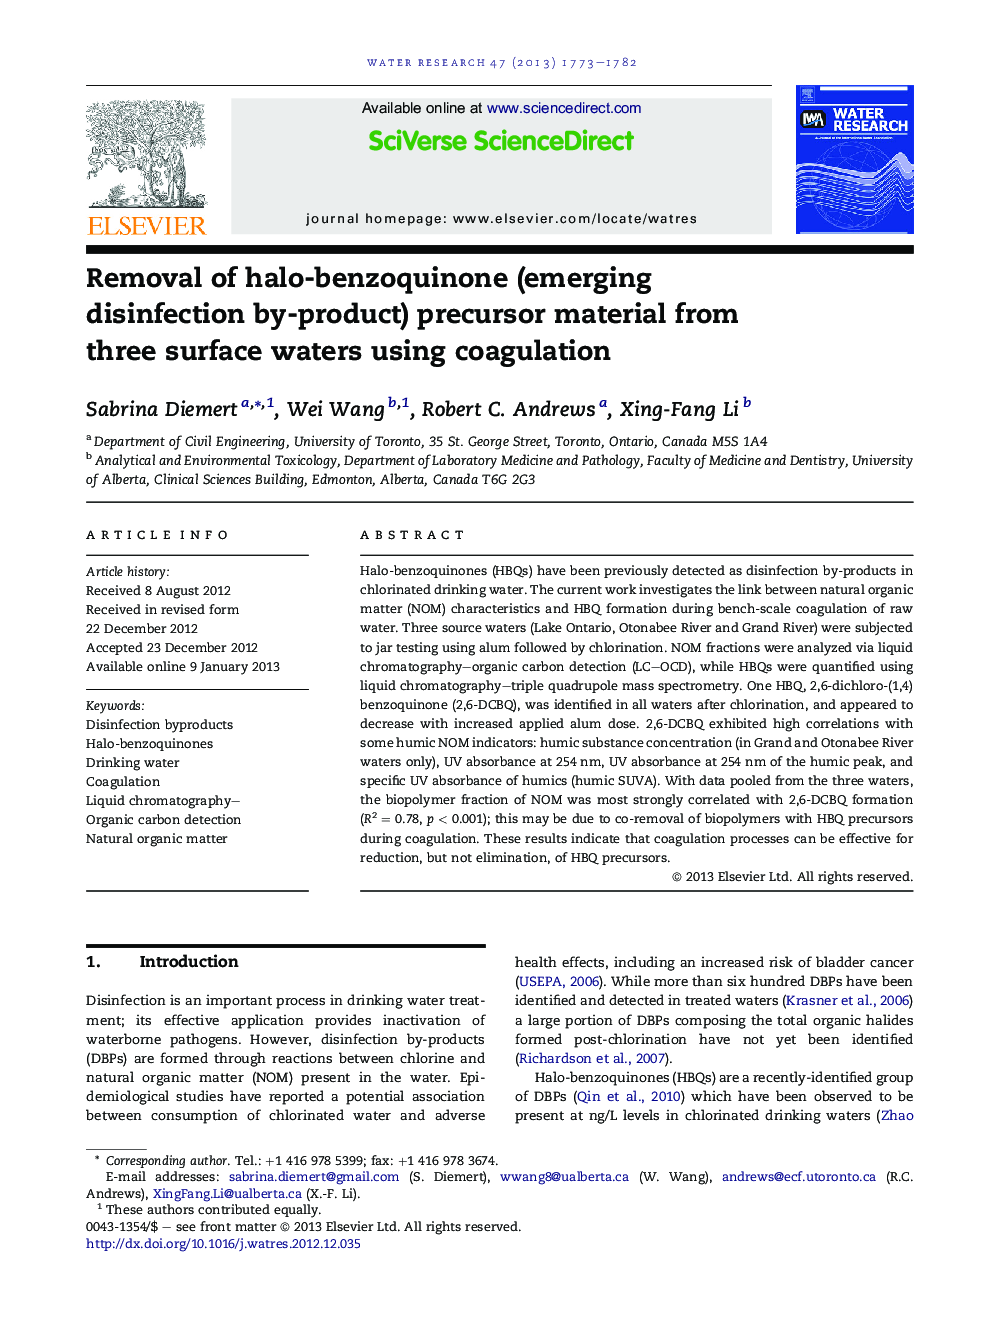 Removal of halo-benzoquinone (emerging disinfection by-product) precursor material from three surface waters using coagulation